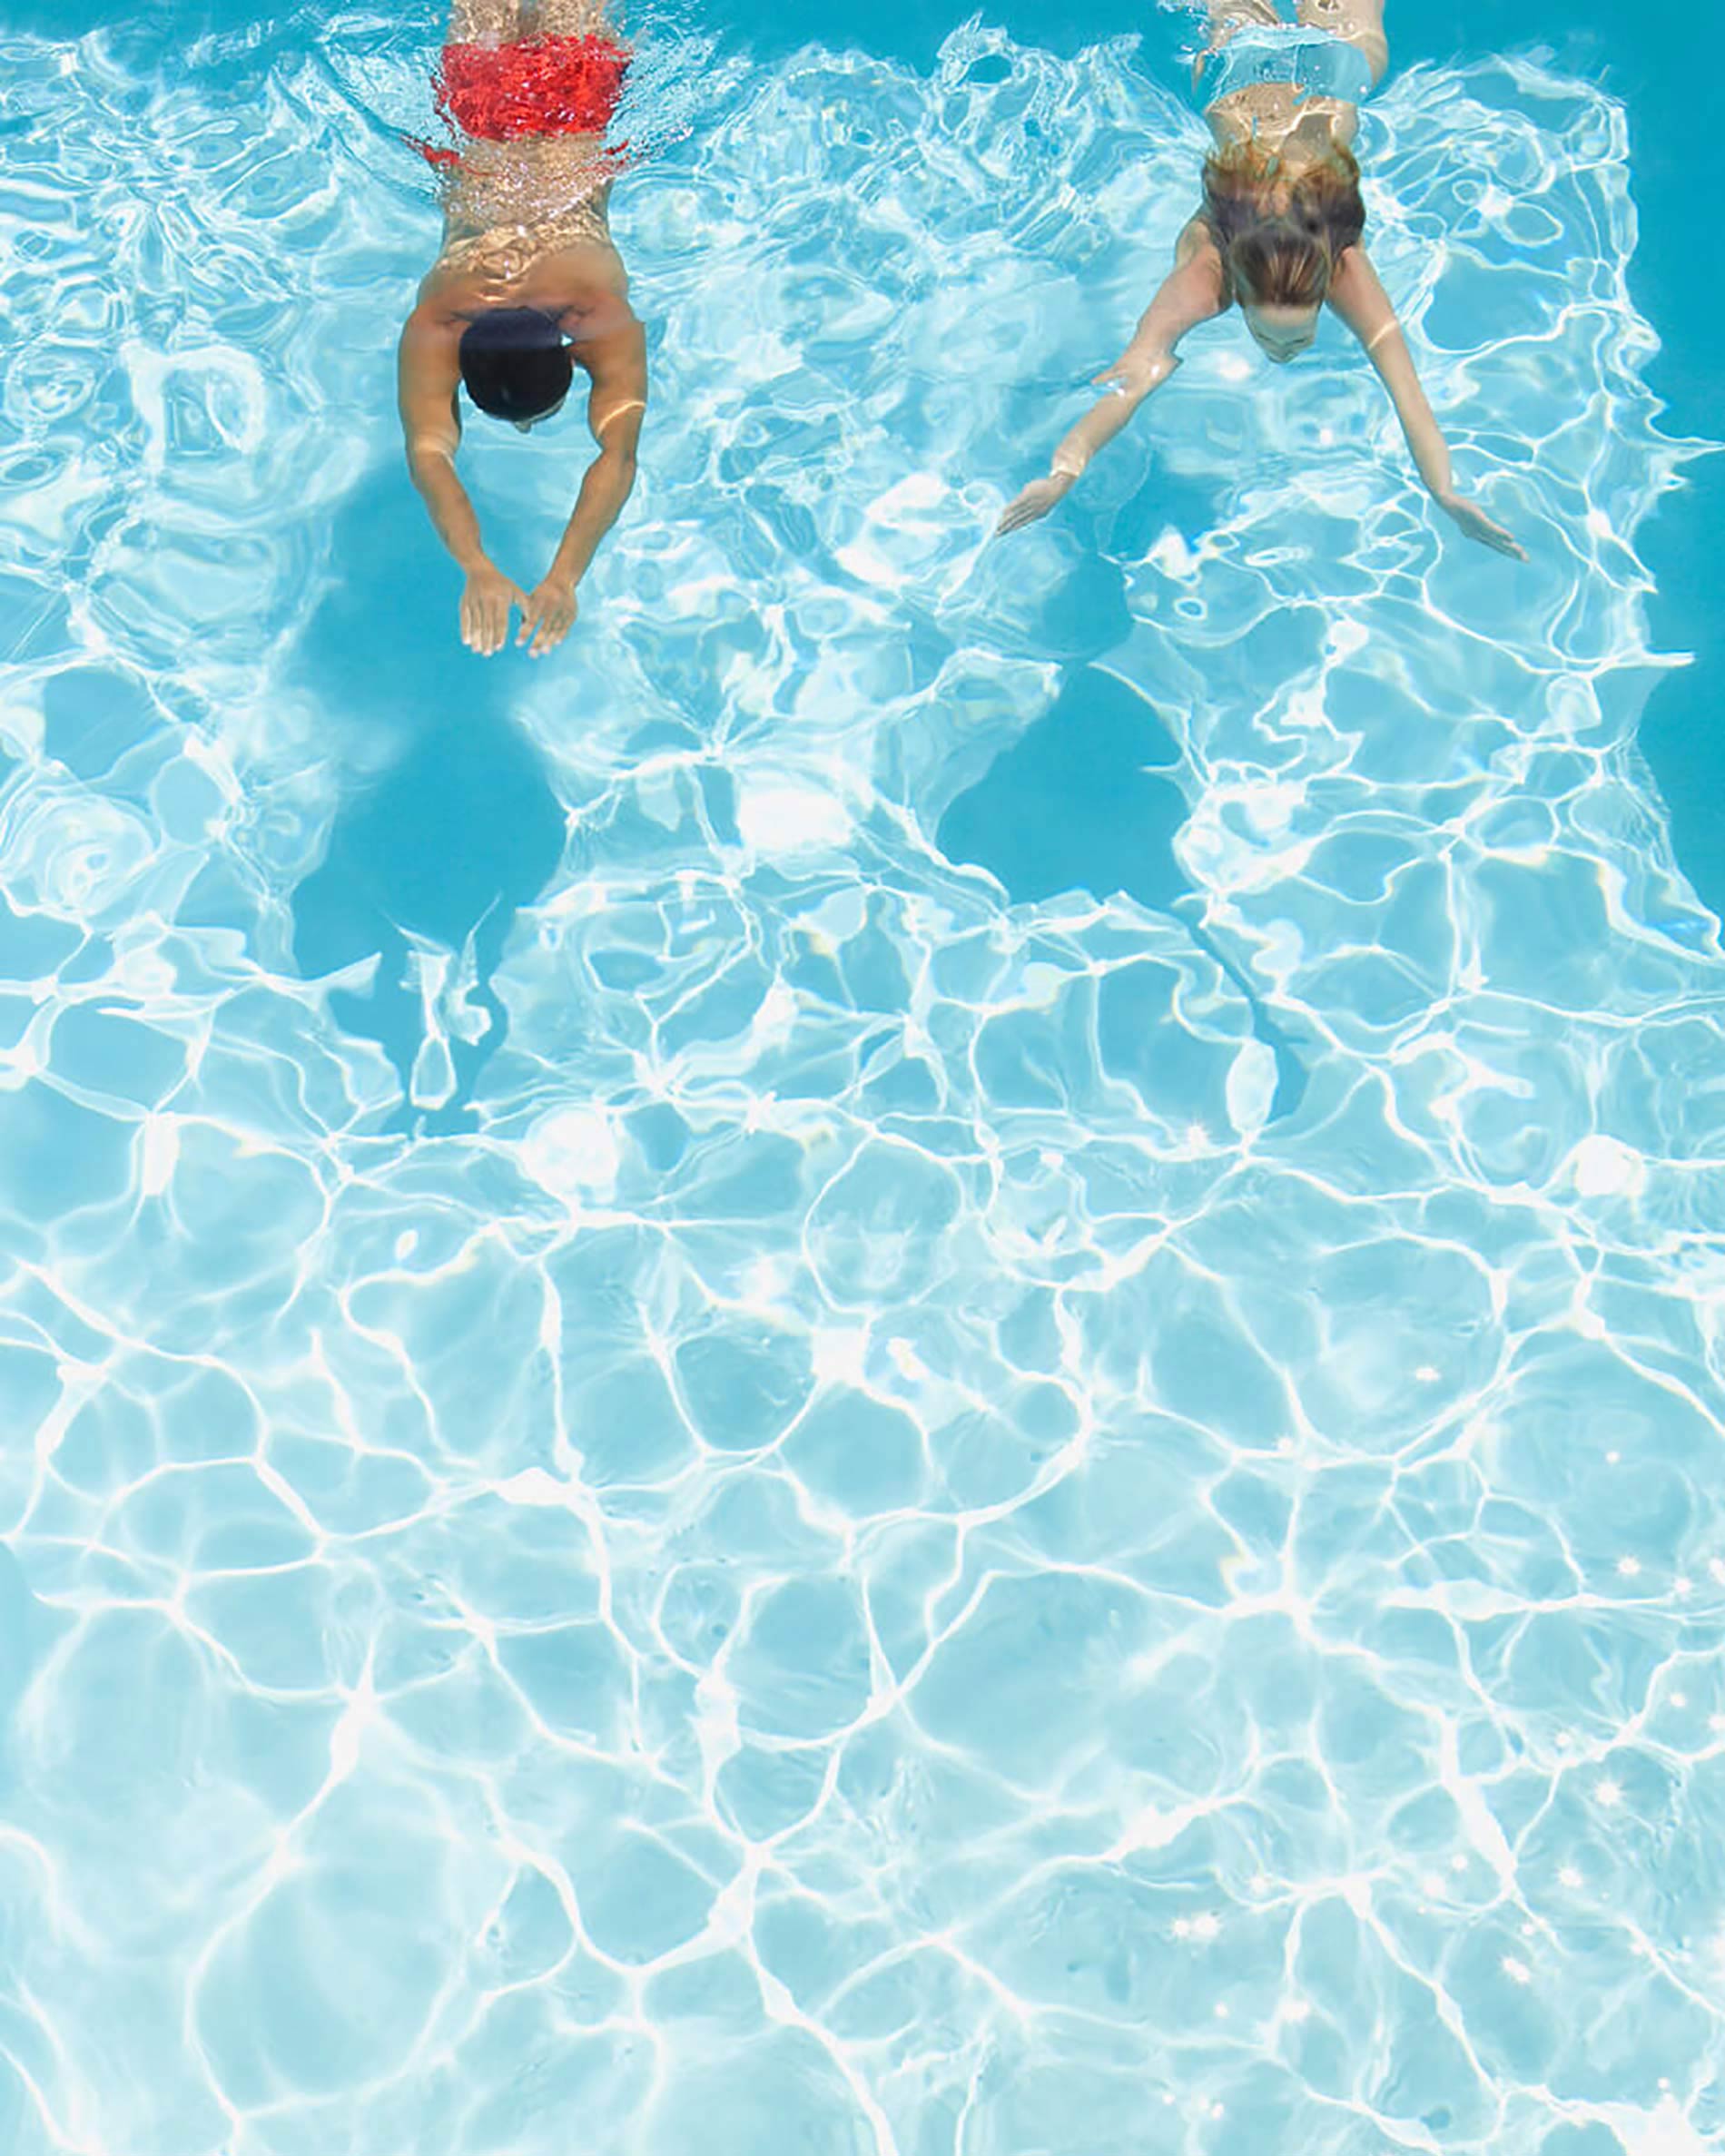 People underwater in a swimming pool